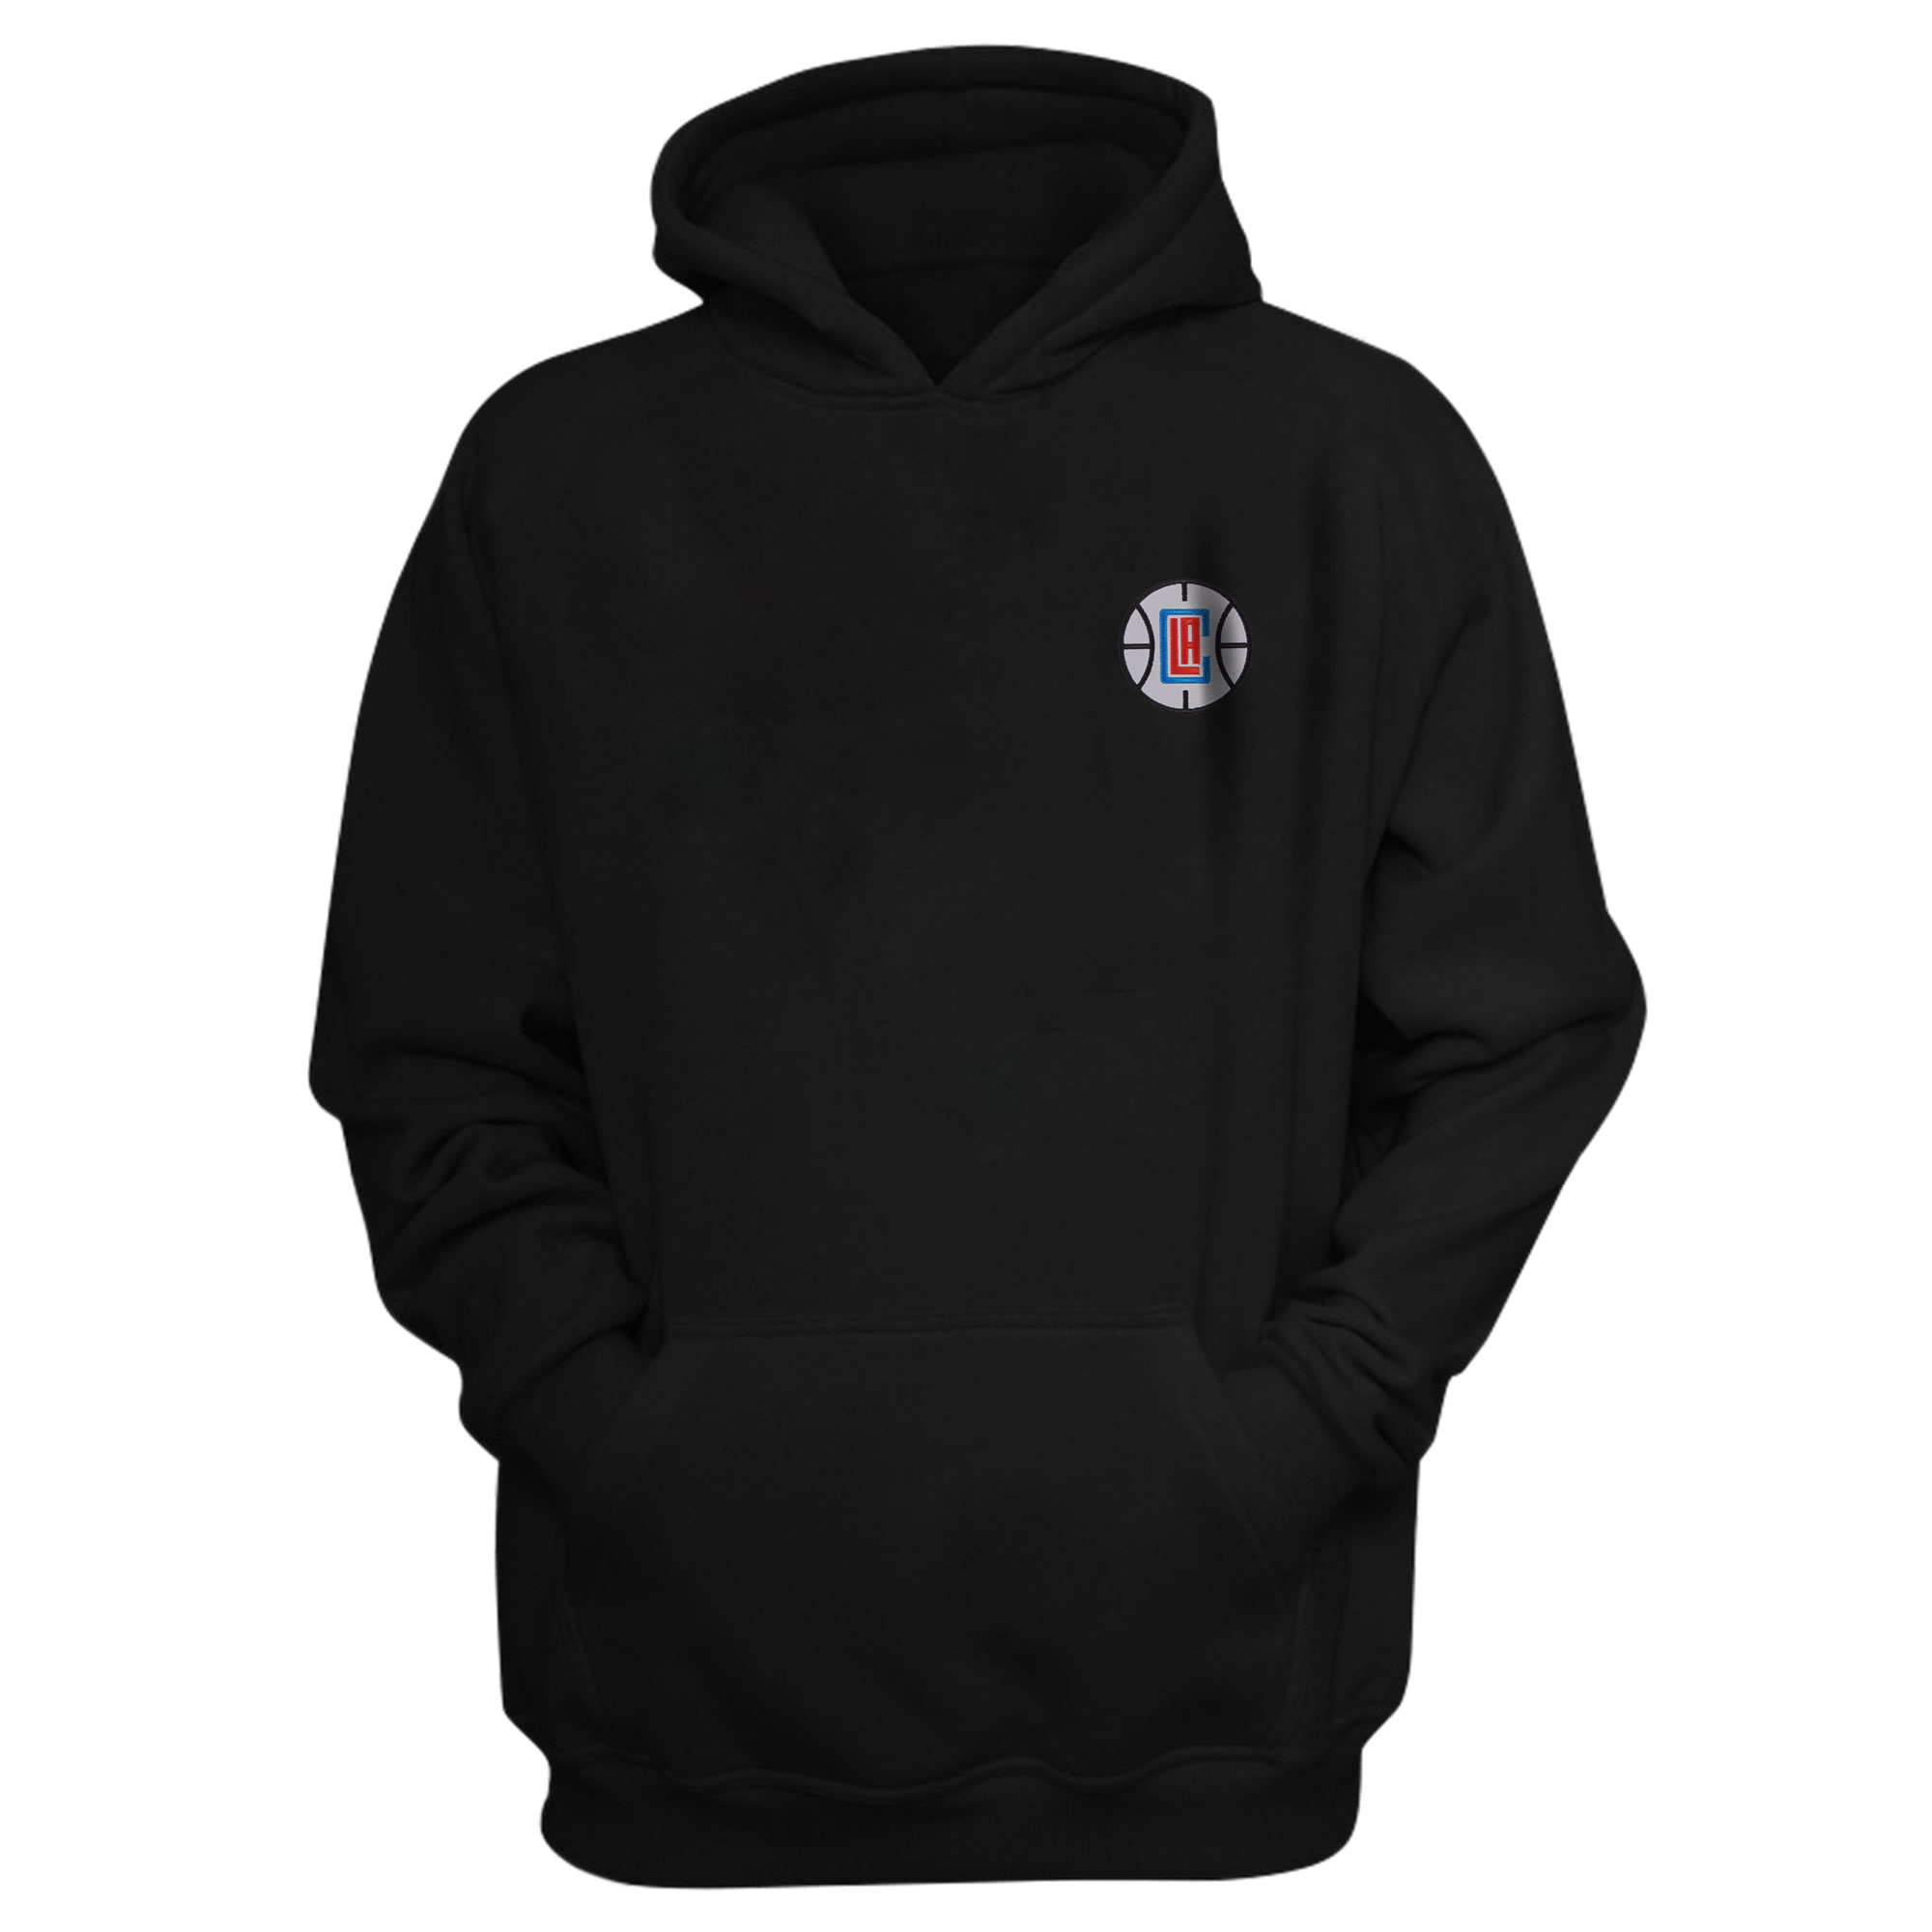 L.A. Clippers Hoodie (Örme)  (HD-BLC-EMBR-CLIPPERS)